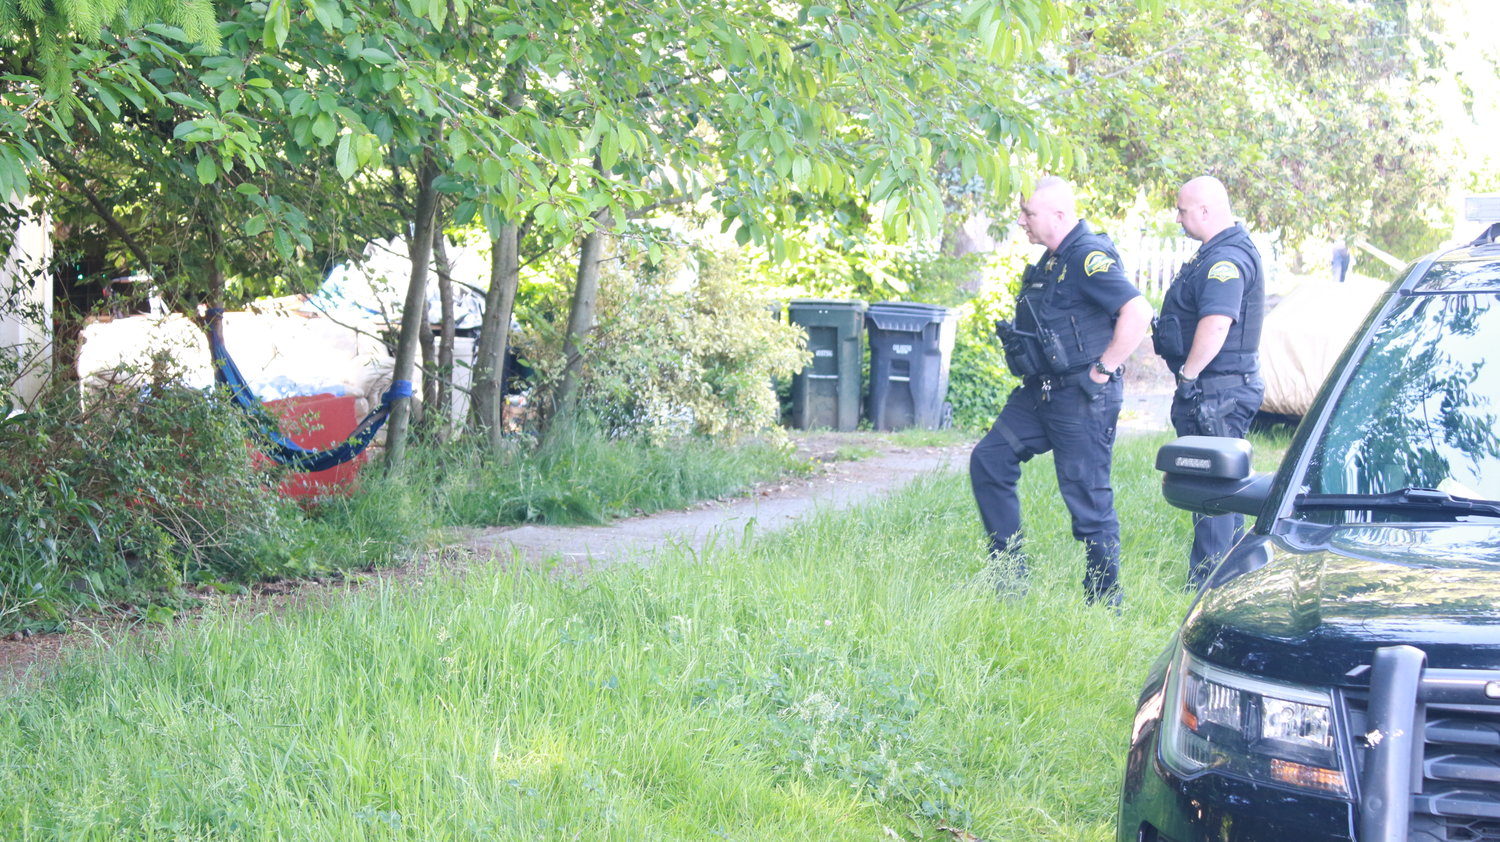 Thurston County Sheriff's deputies arrived to evict squatters from a house in Olympia's eastside neighborhood on June 4, 2021.